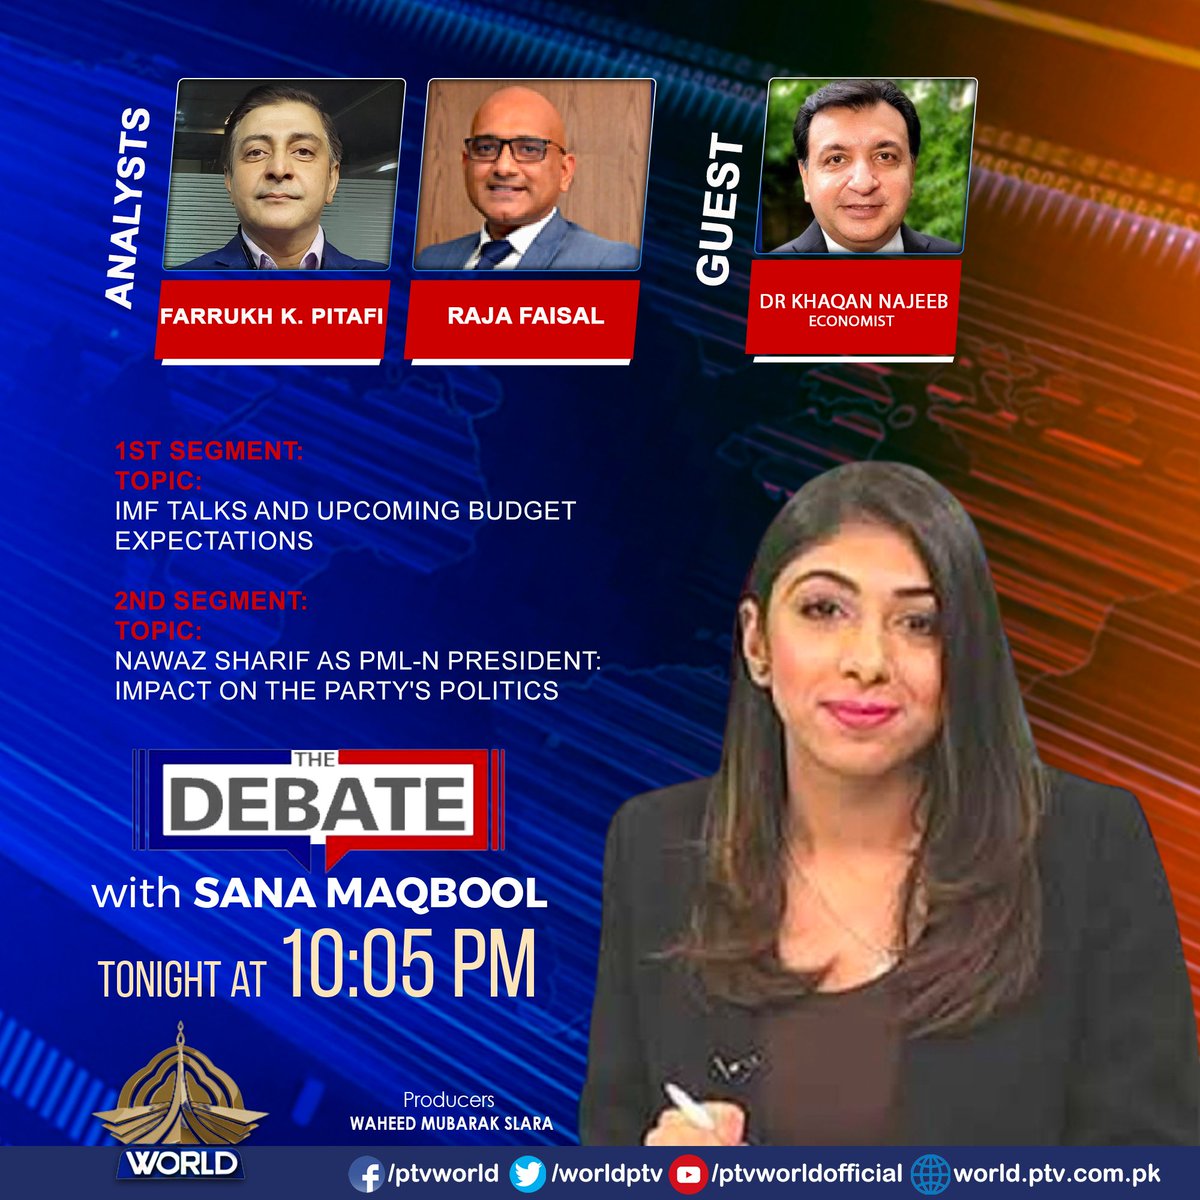 The Debate Time: 10:05 only on PTV WORLD